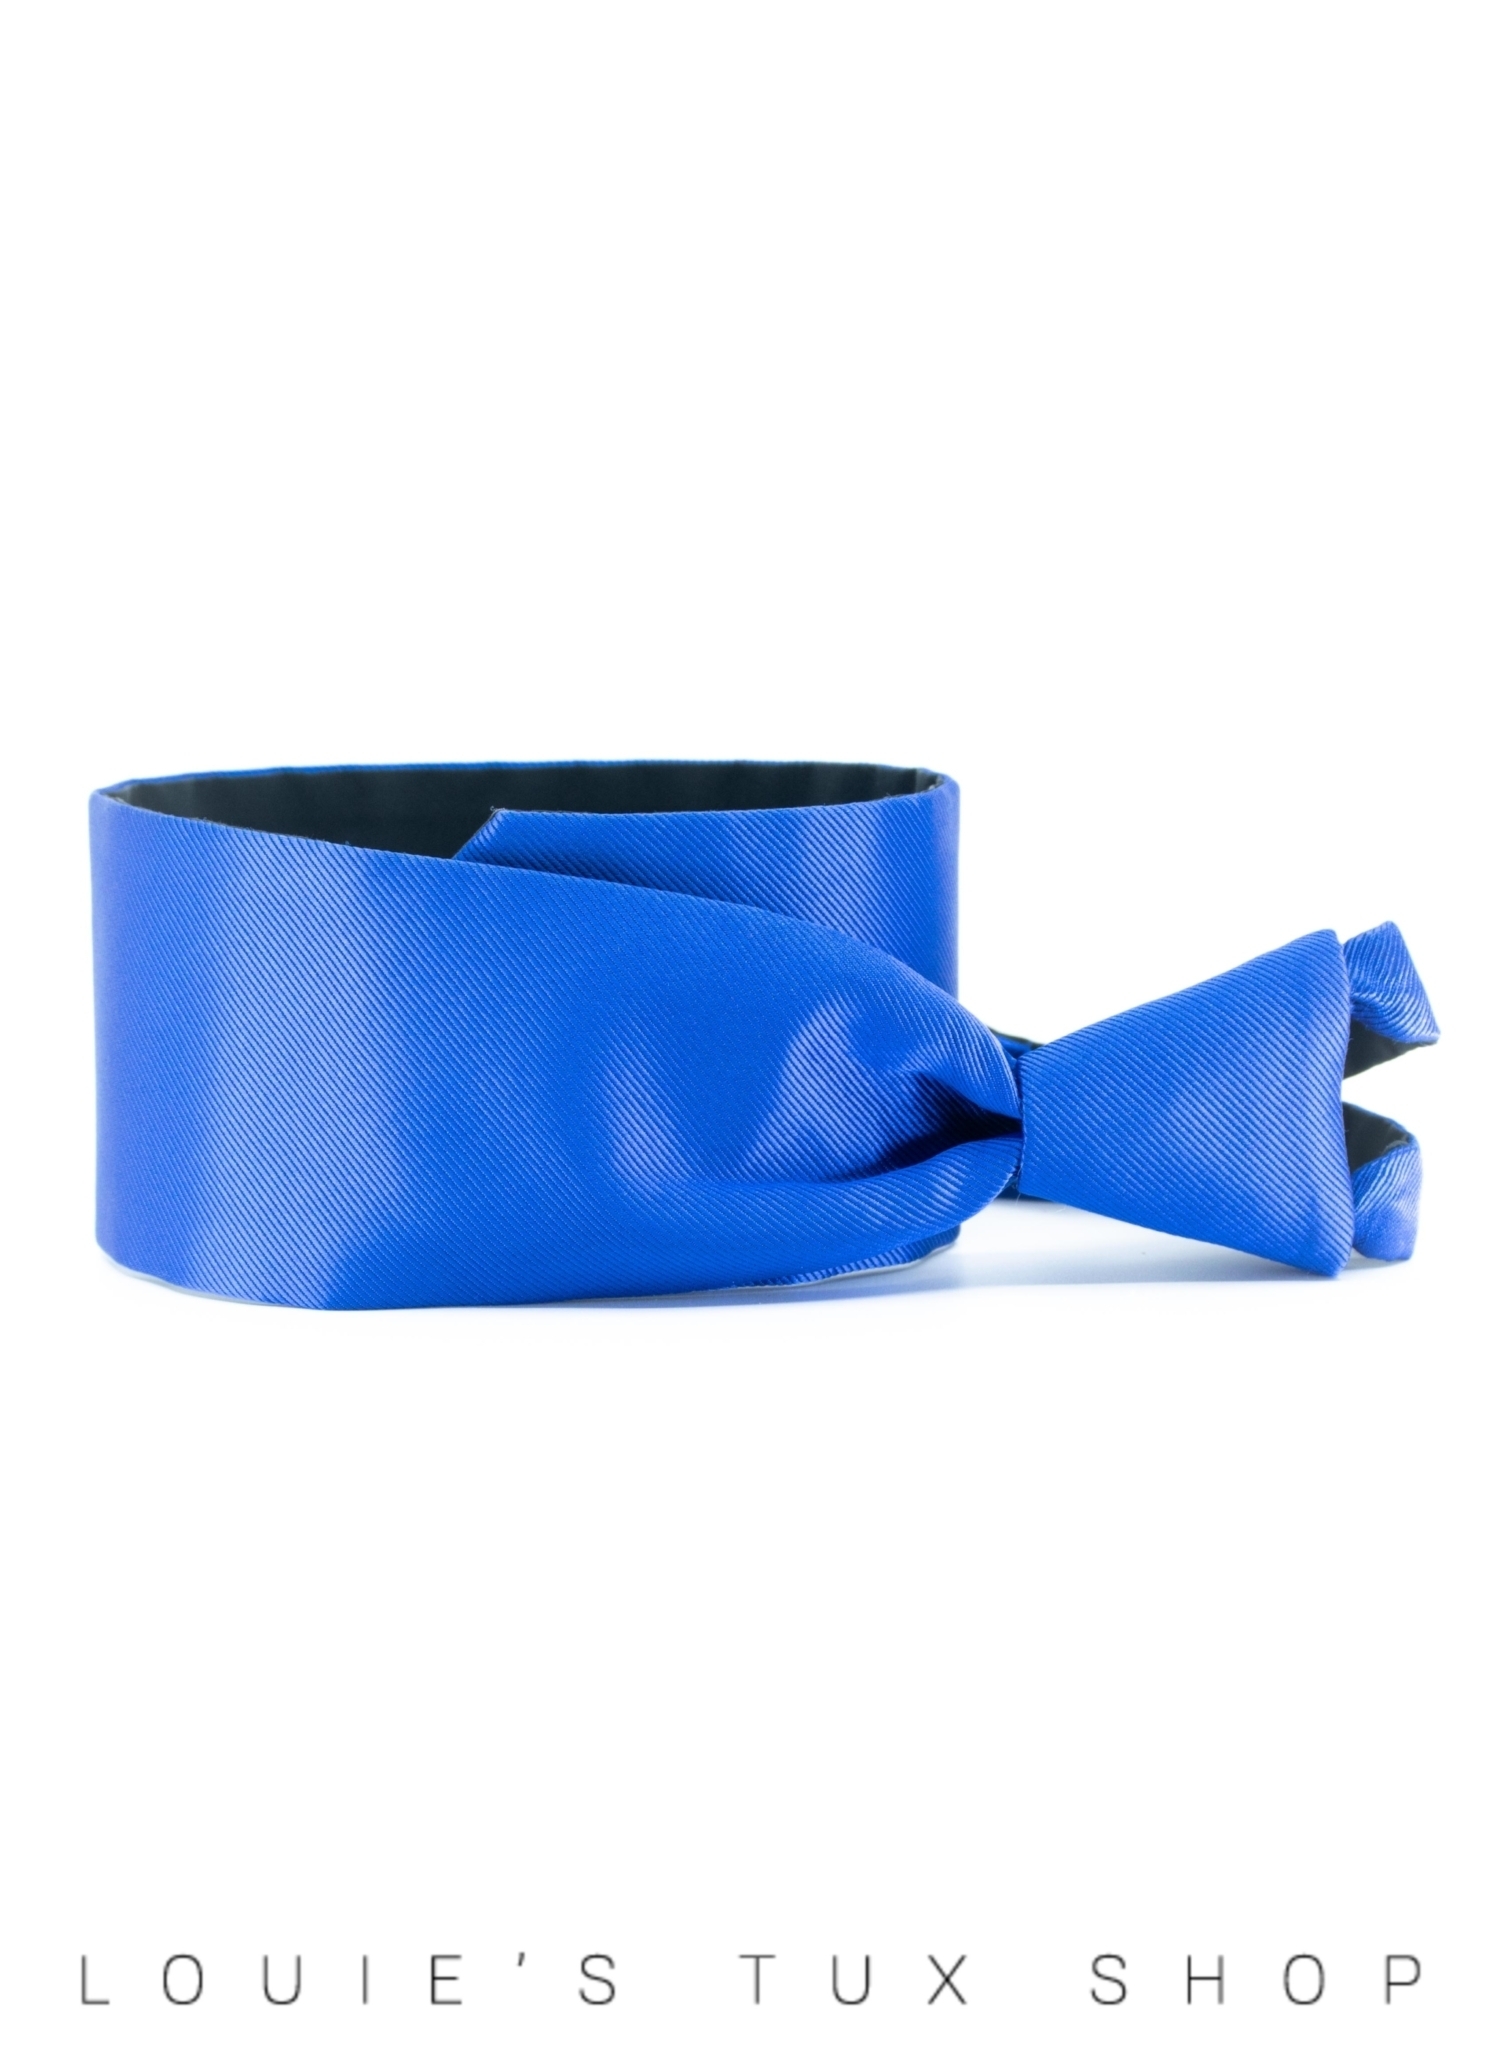 Royal Blue Solid Bow Tie